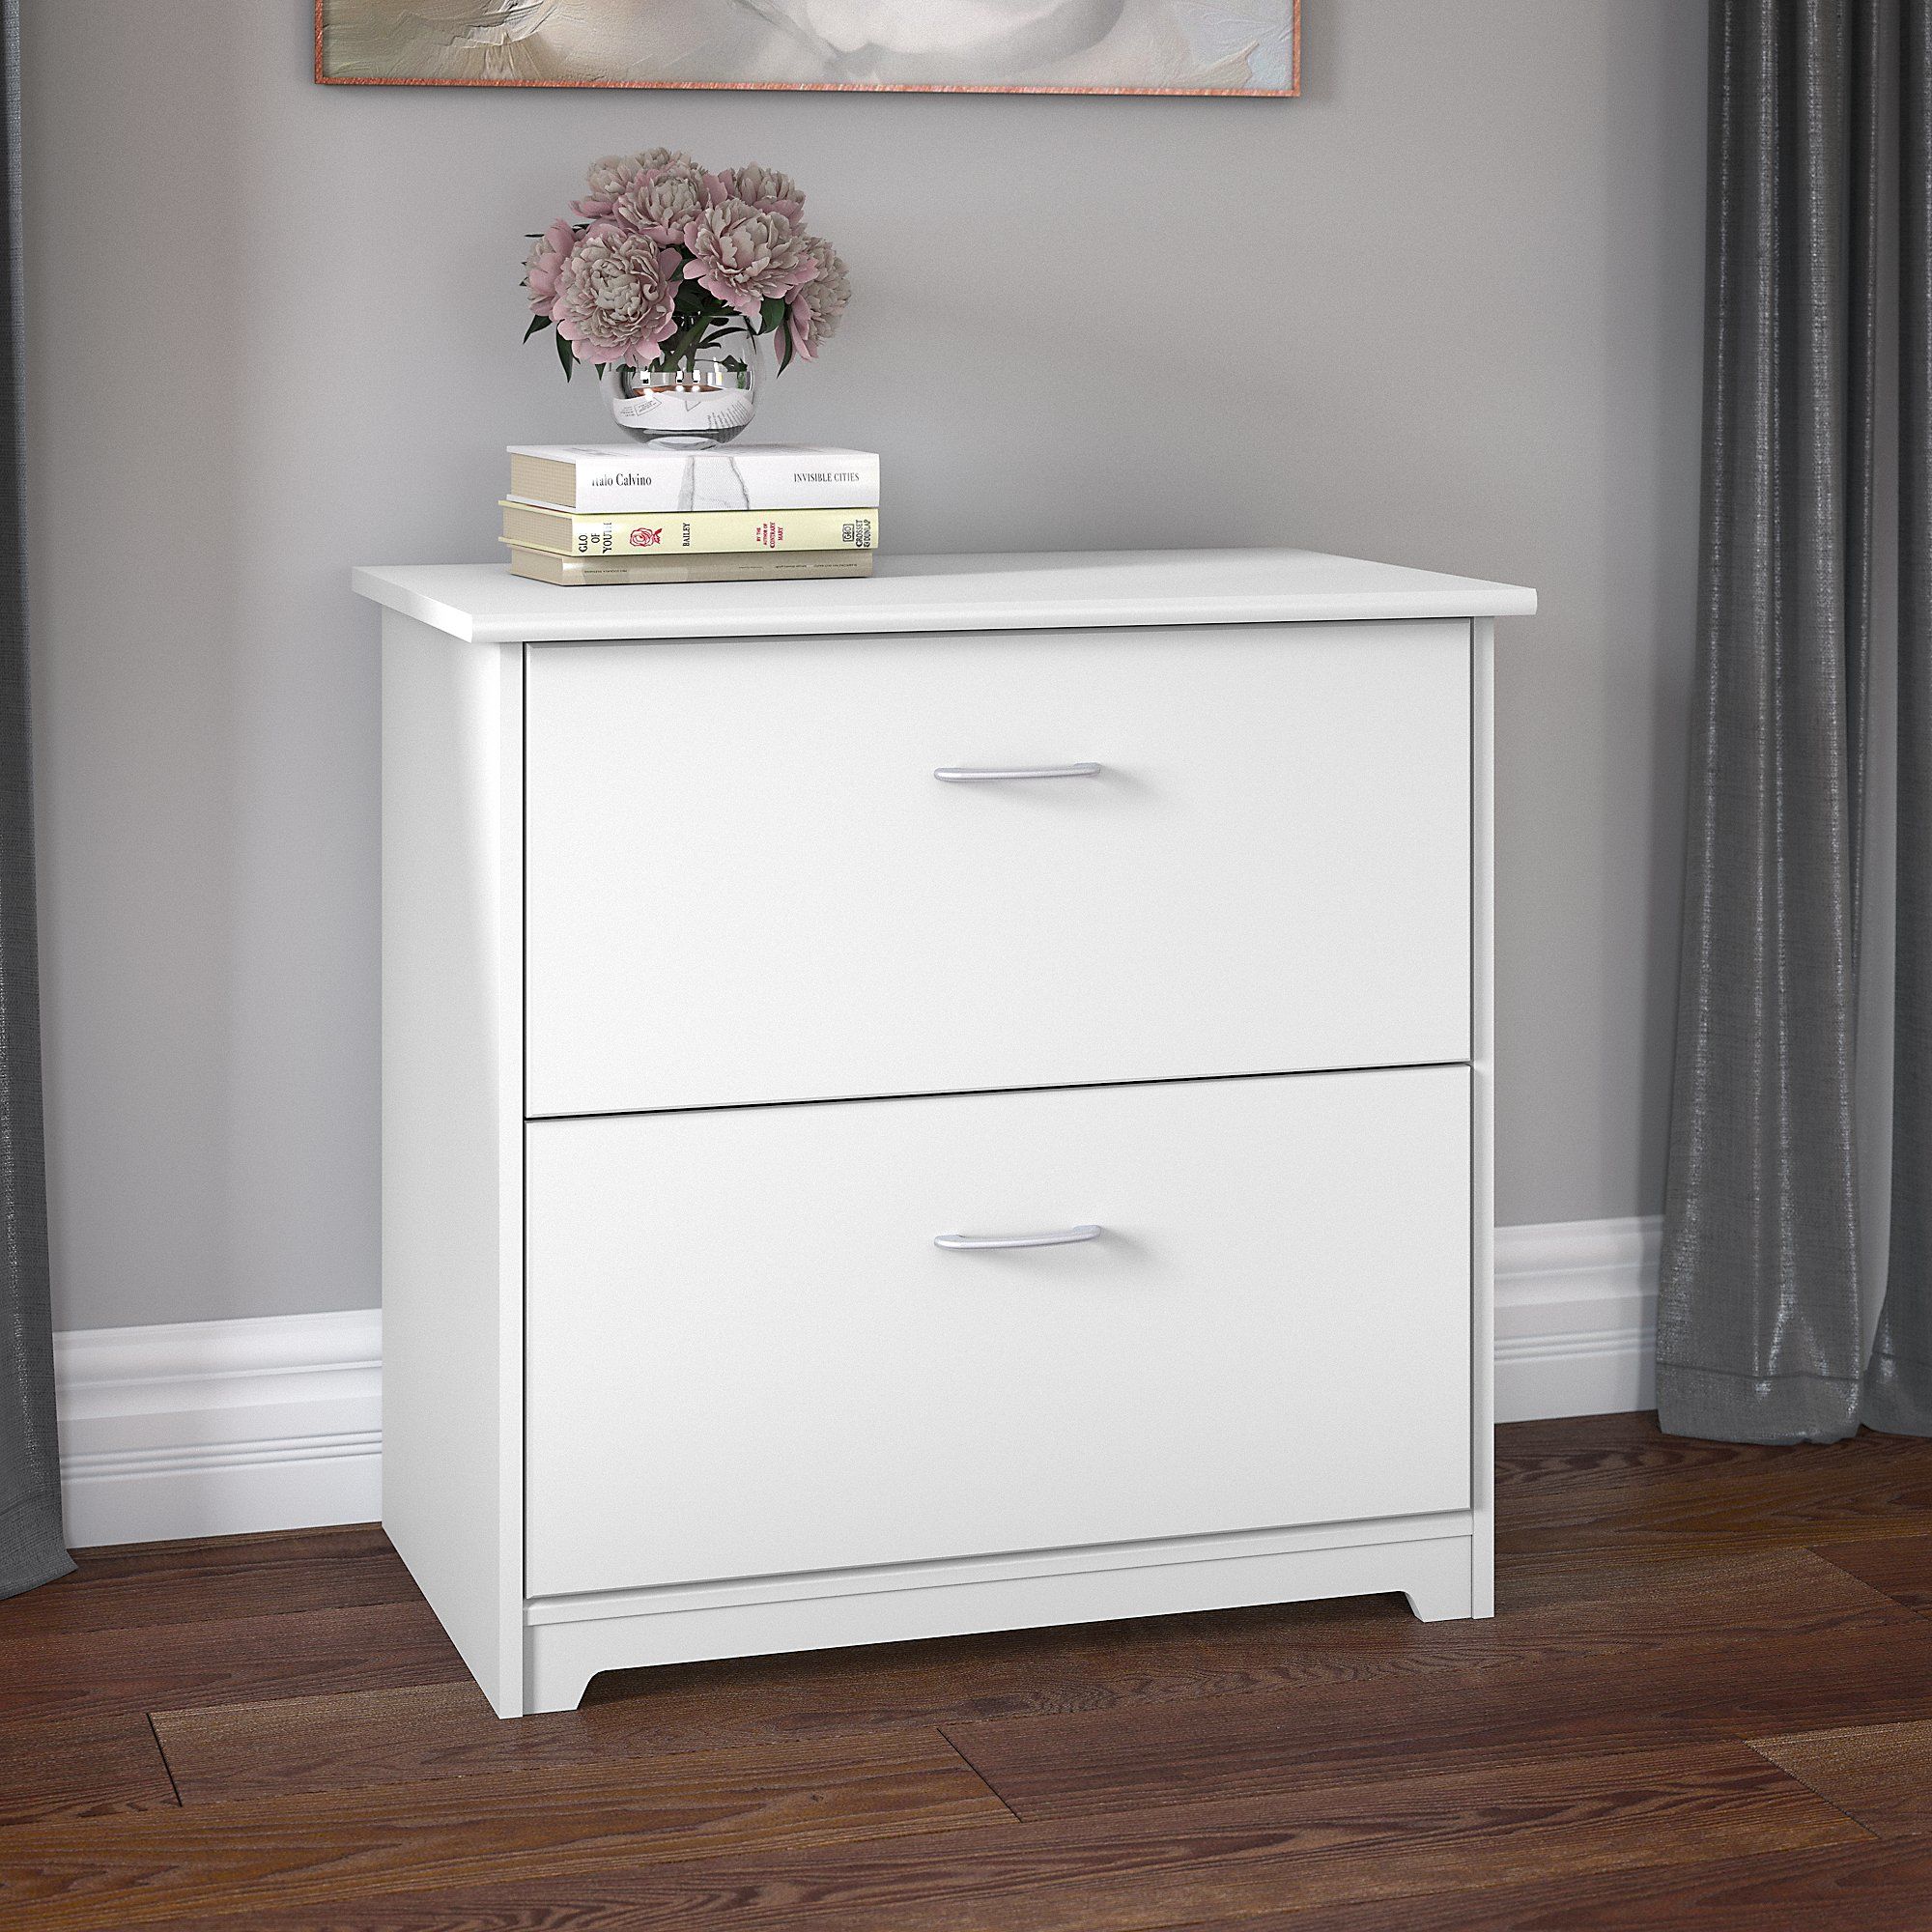 White Vertical File Cabinet - Filing Cabinets